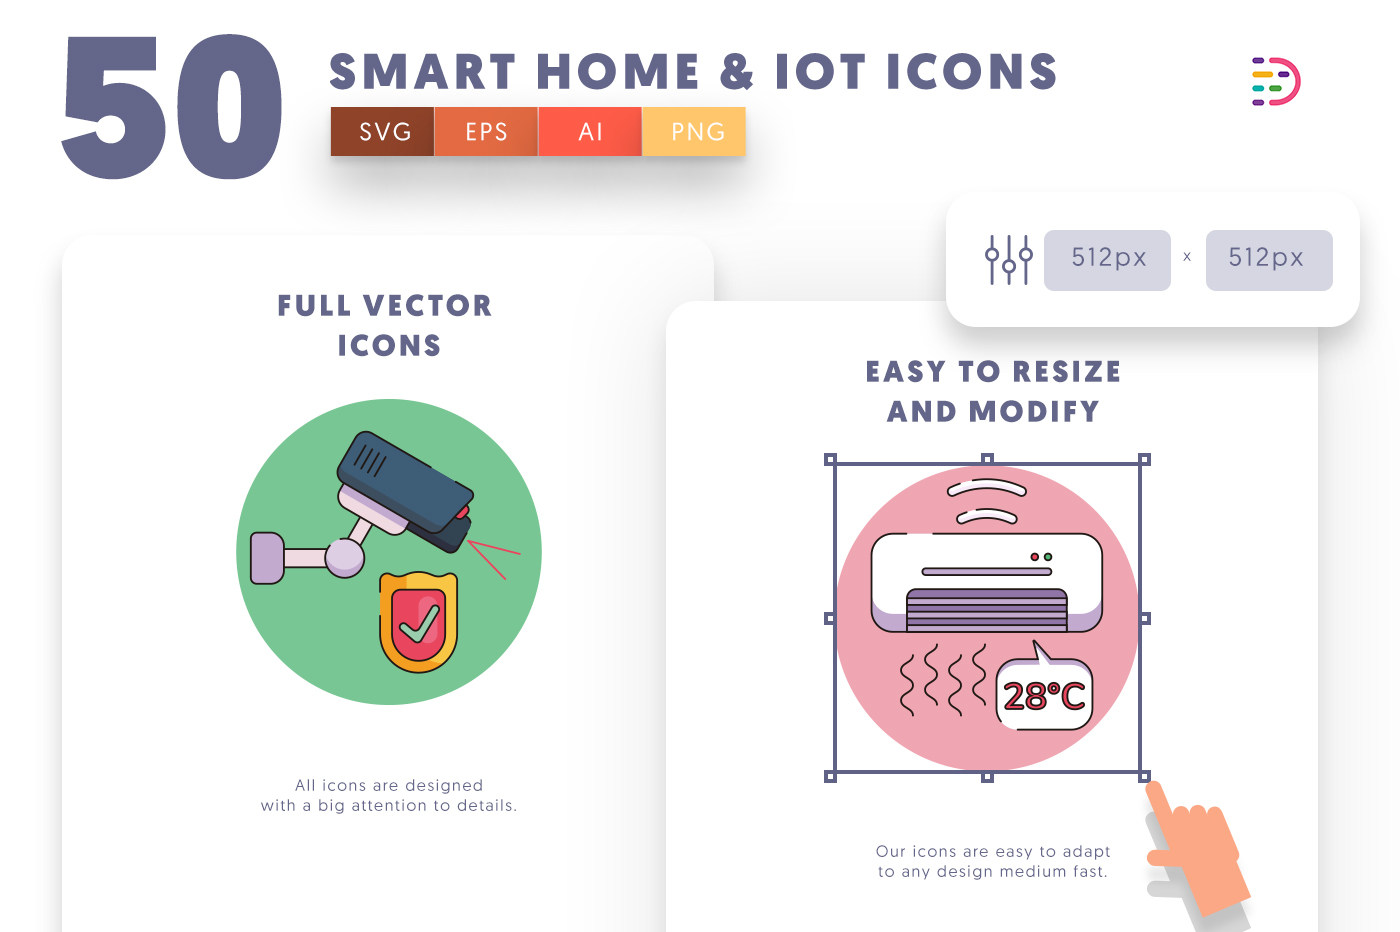 Full vector Smart home and IoT Icons